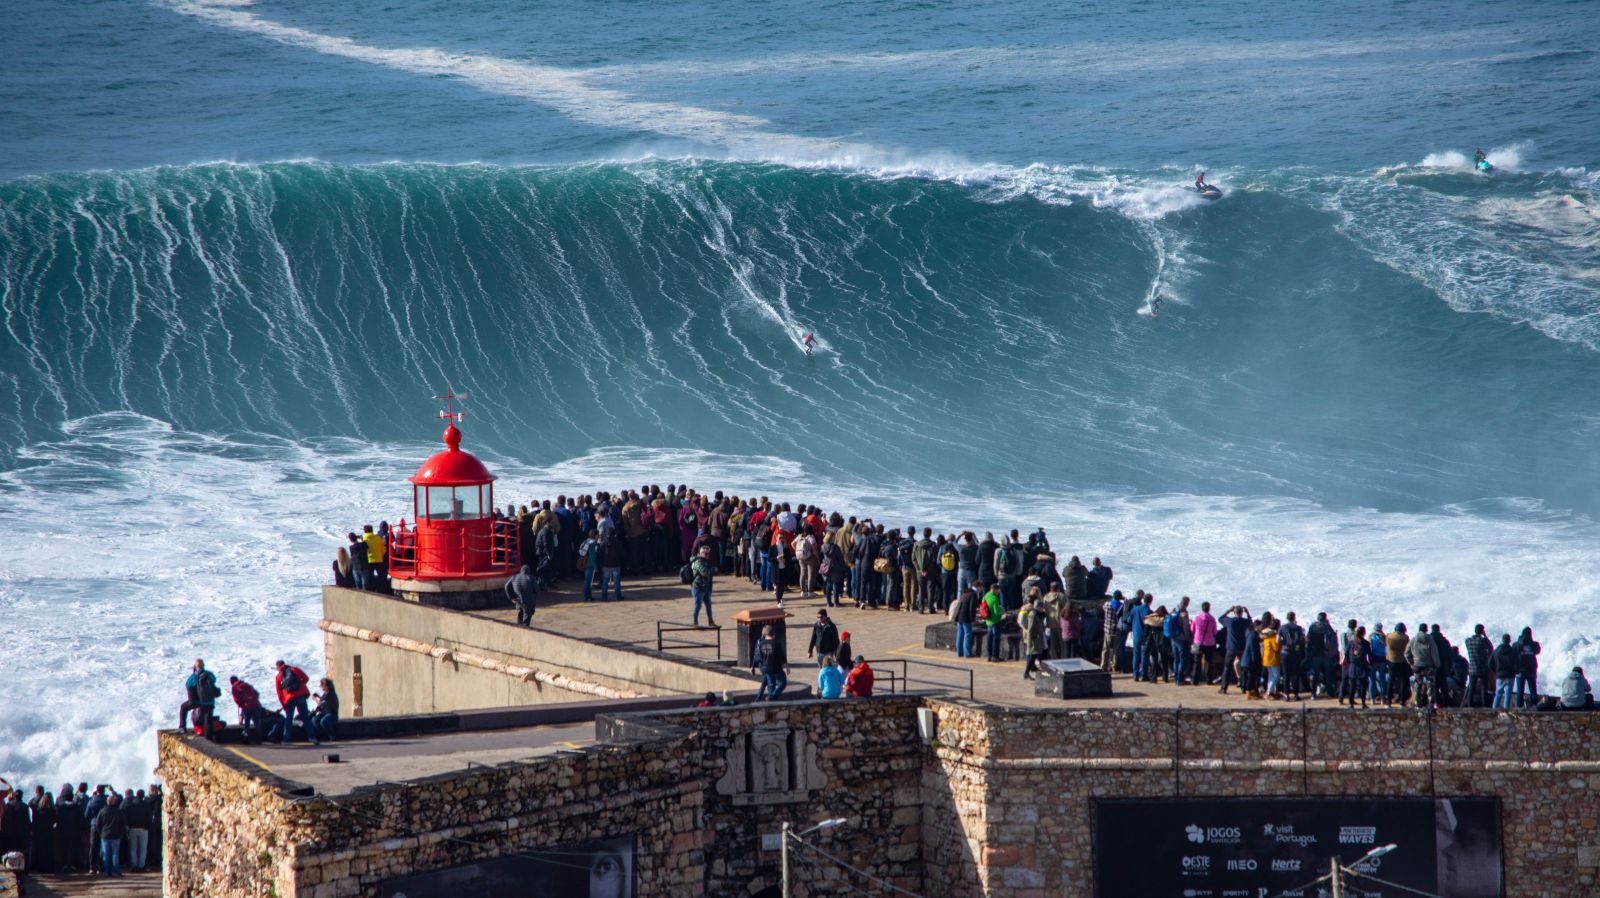 Crowd observing huge waves and surfers in Nazaré.